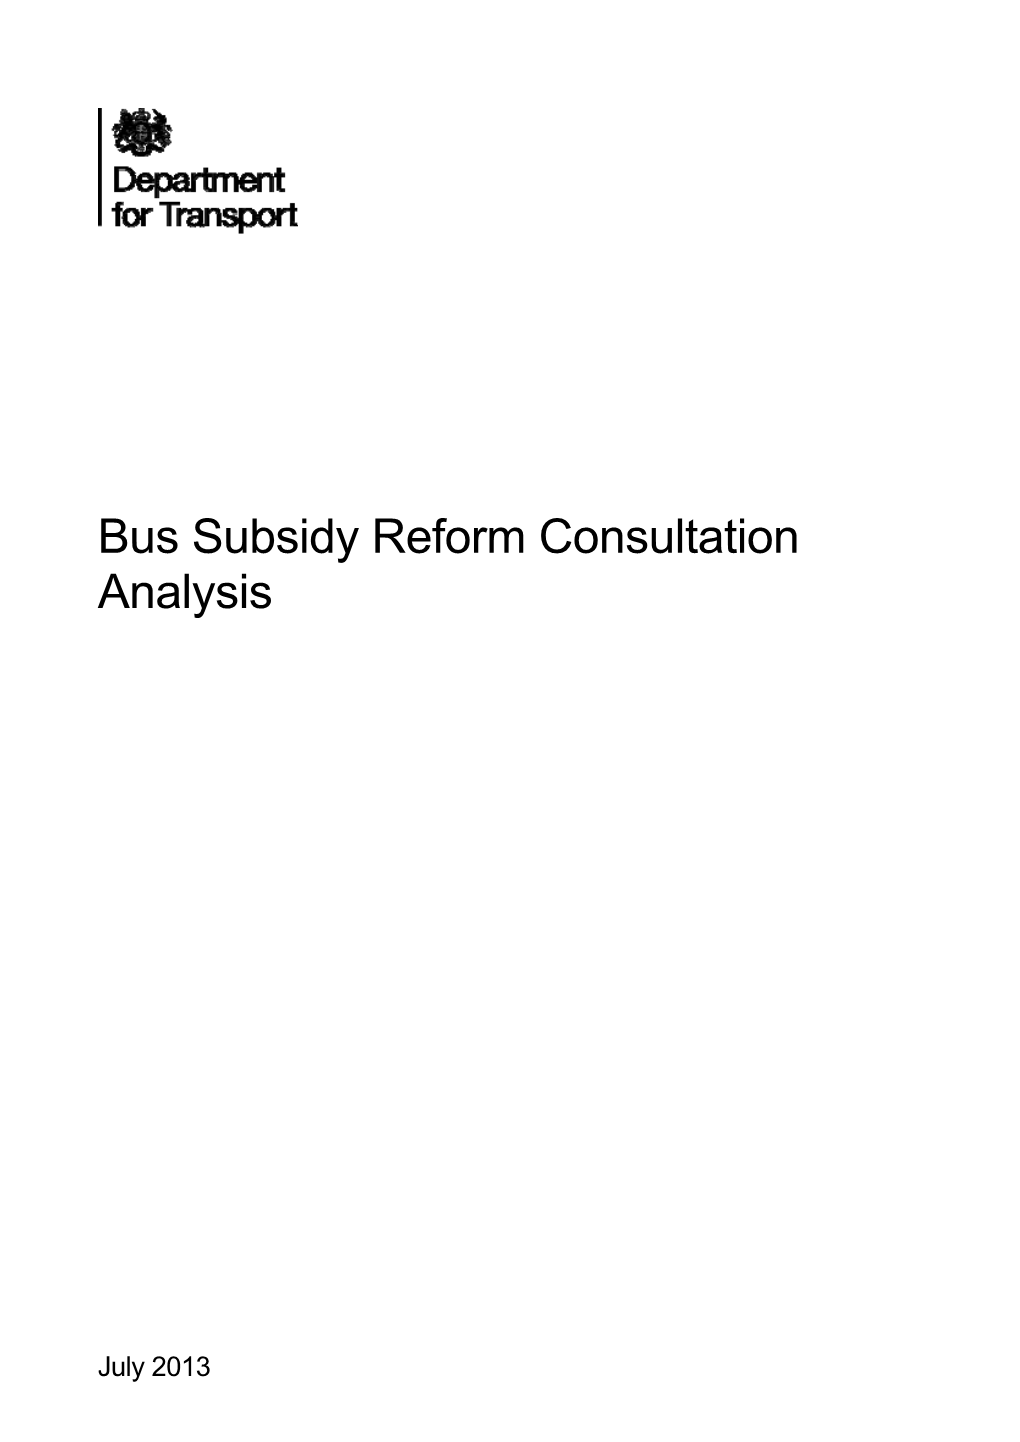 Bus Subsidy Reform Consultation Analysis